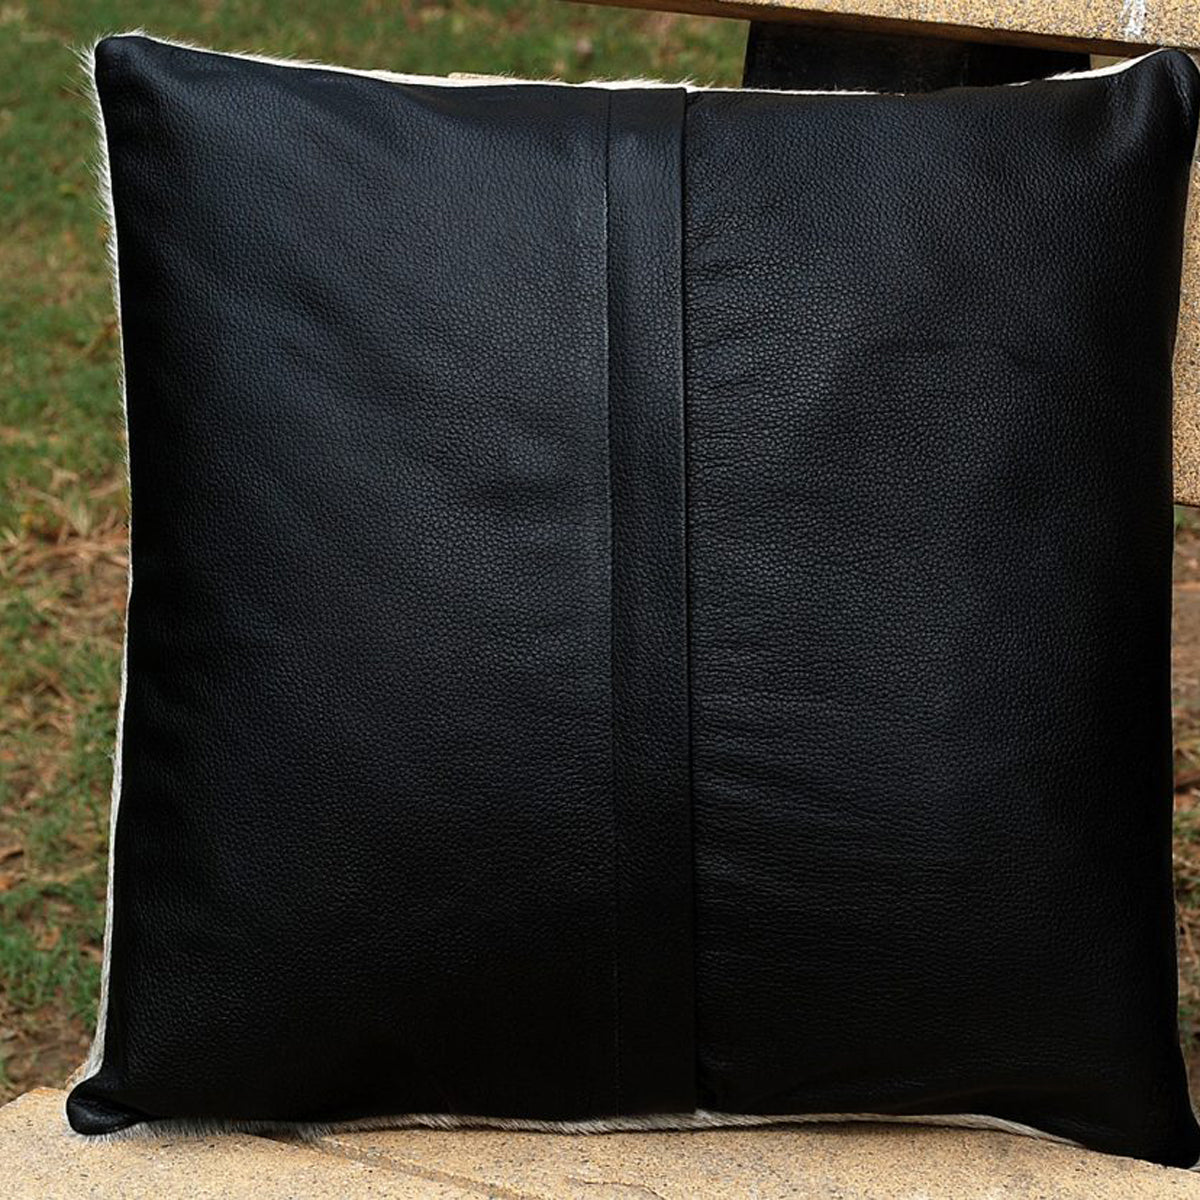 Cowhide Leather Cotton Seed Cushion Cover